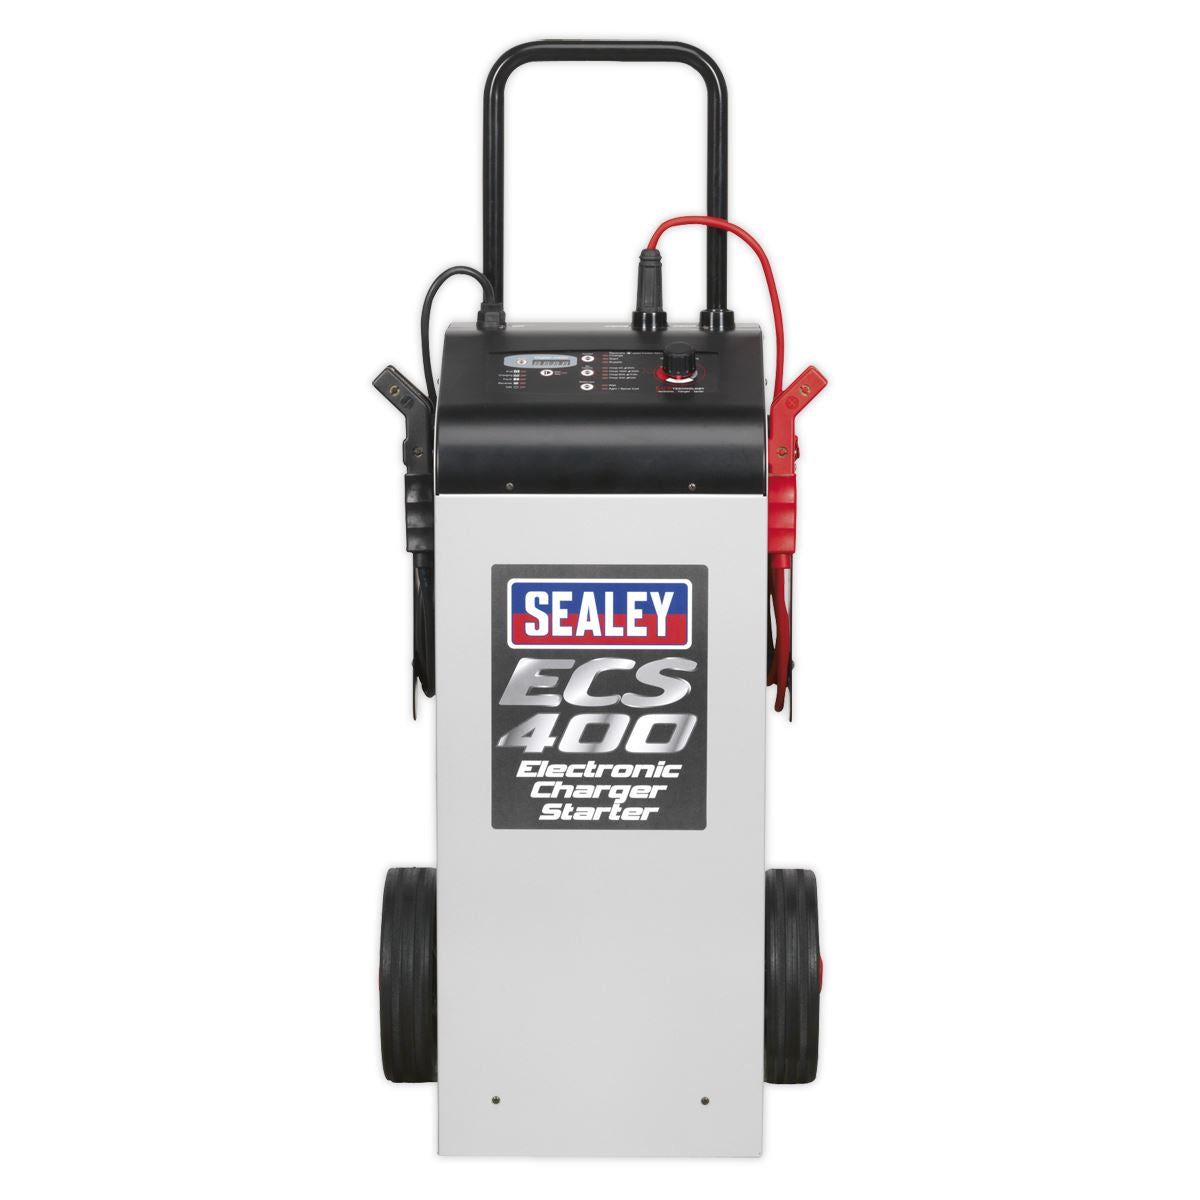 Sealey Electronic Charger Maintainer/Starter 75/400A 12/24V